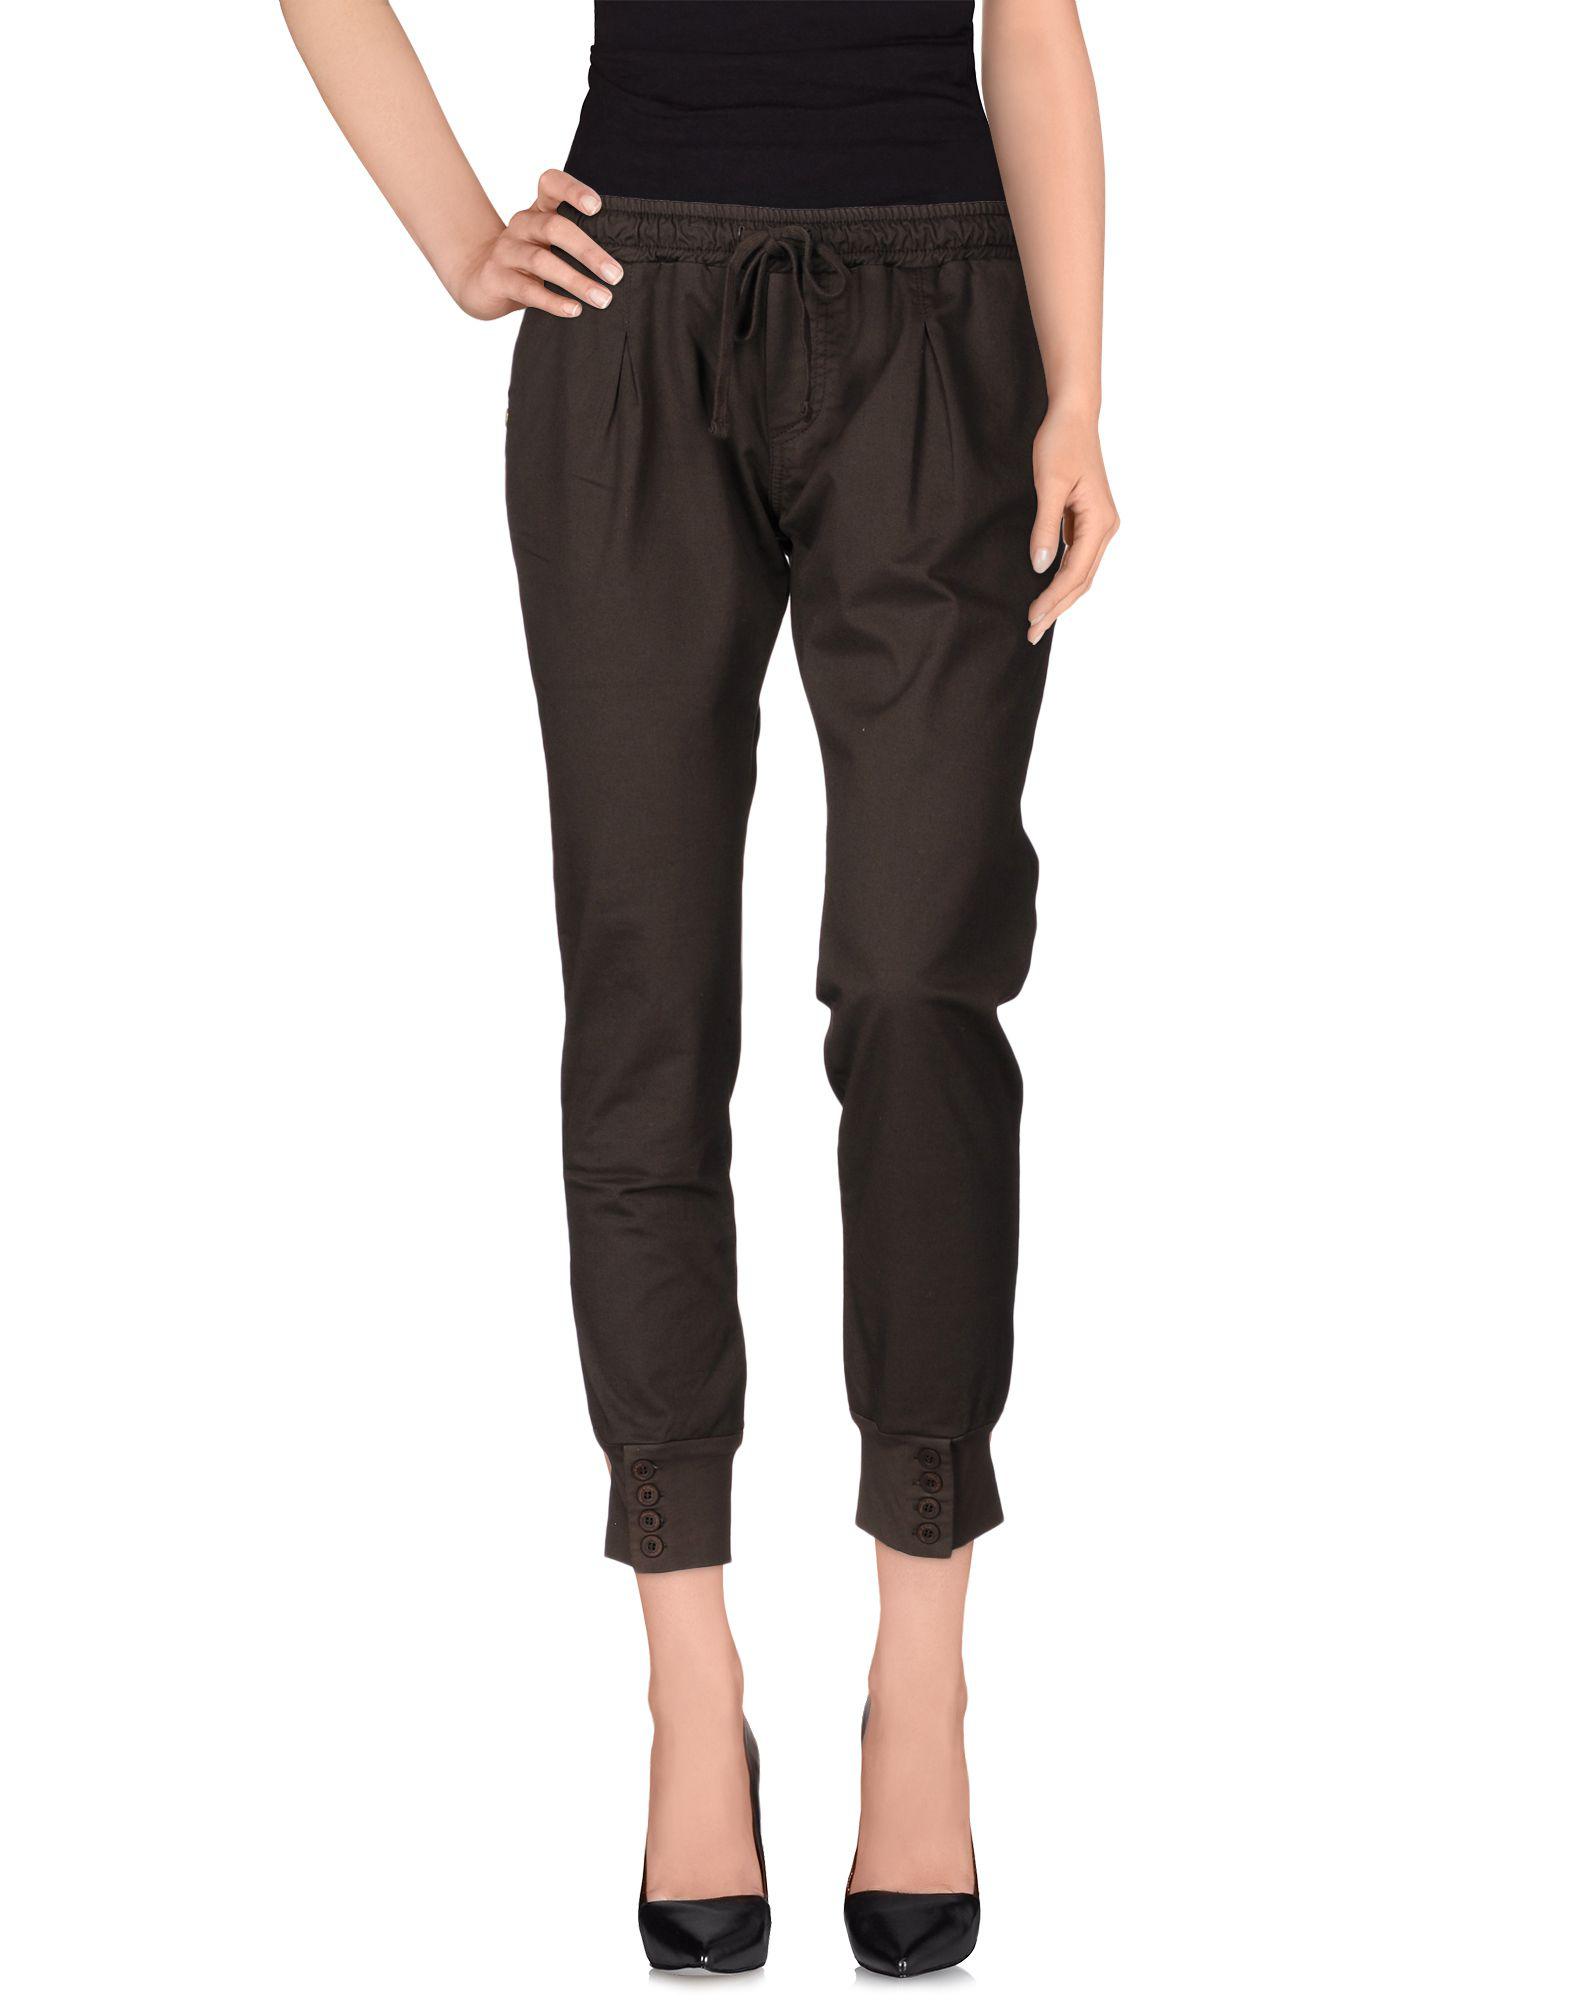 Manila Grace Casual Pants in Brown - Lyst